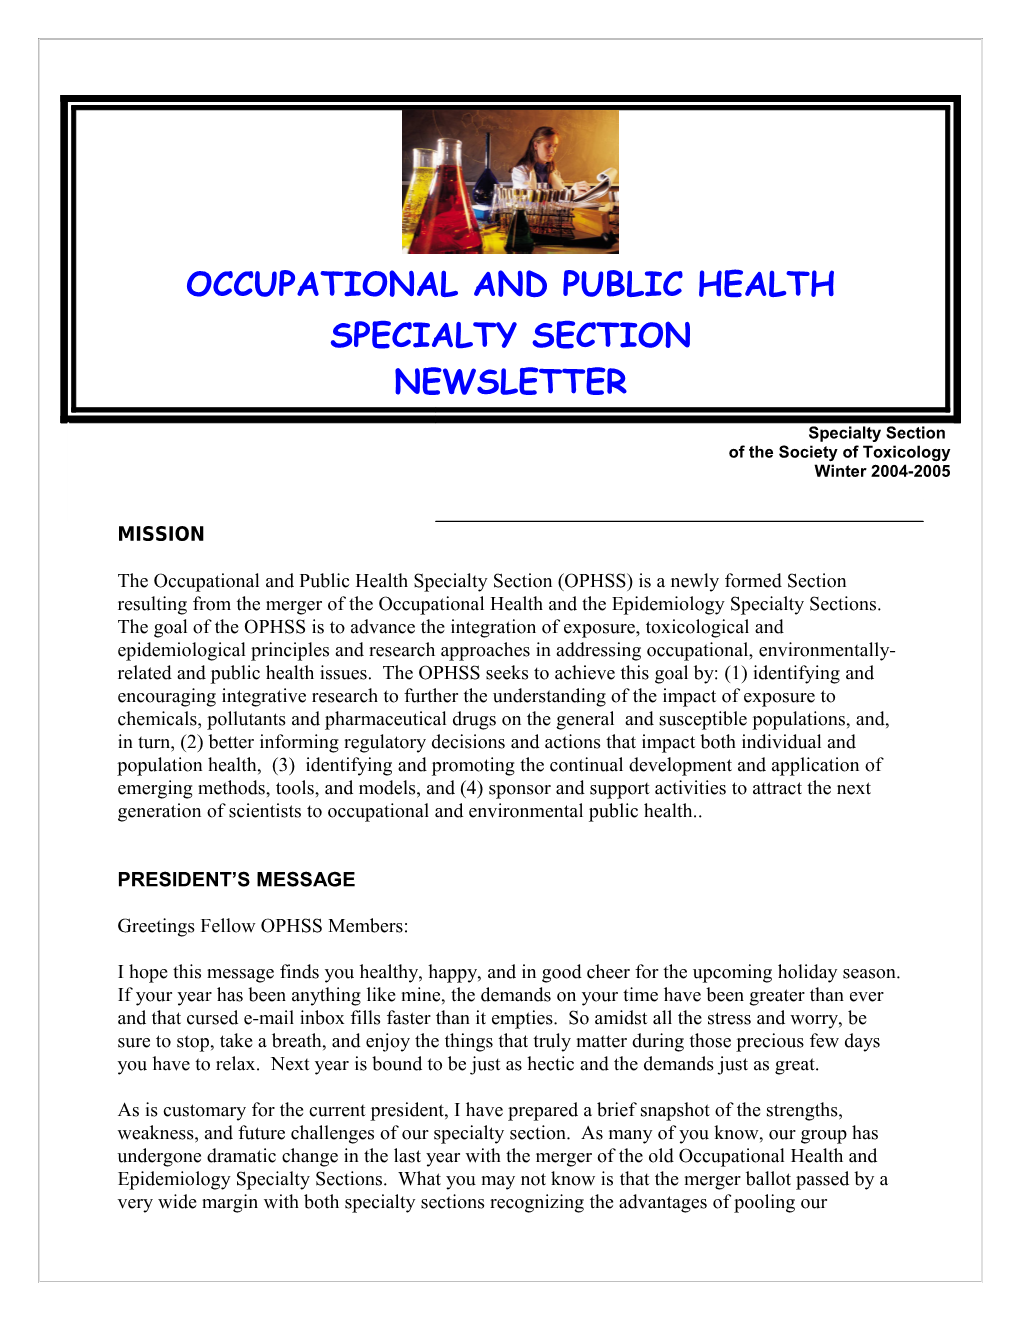 Regulatory and Safety Evaluation Specialty Section - Newsletter s1